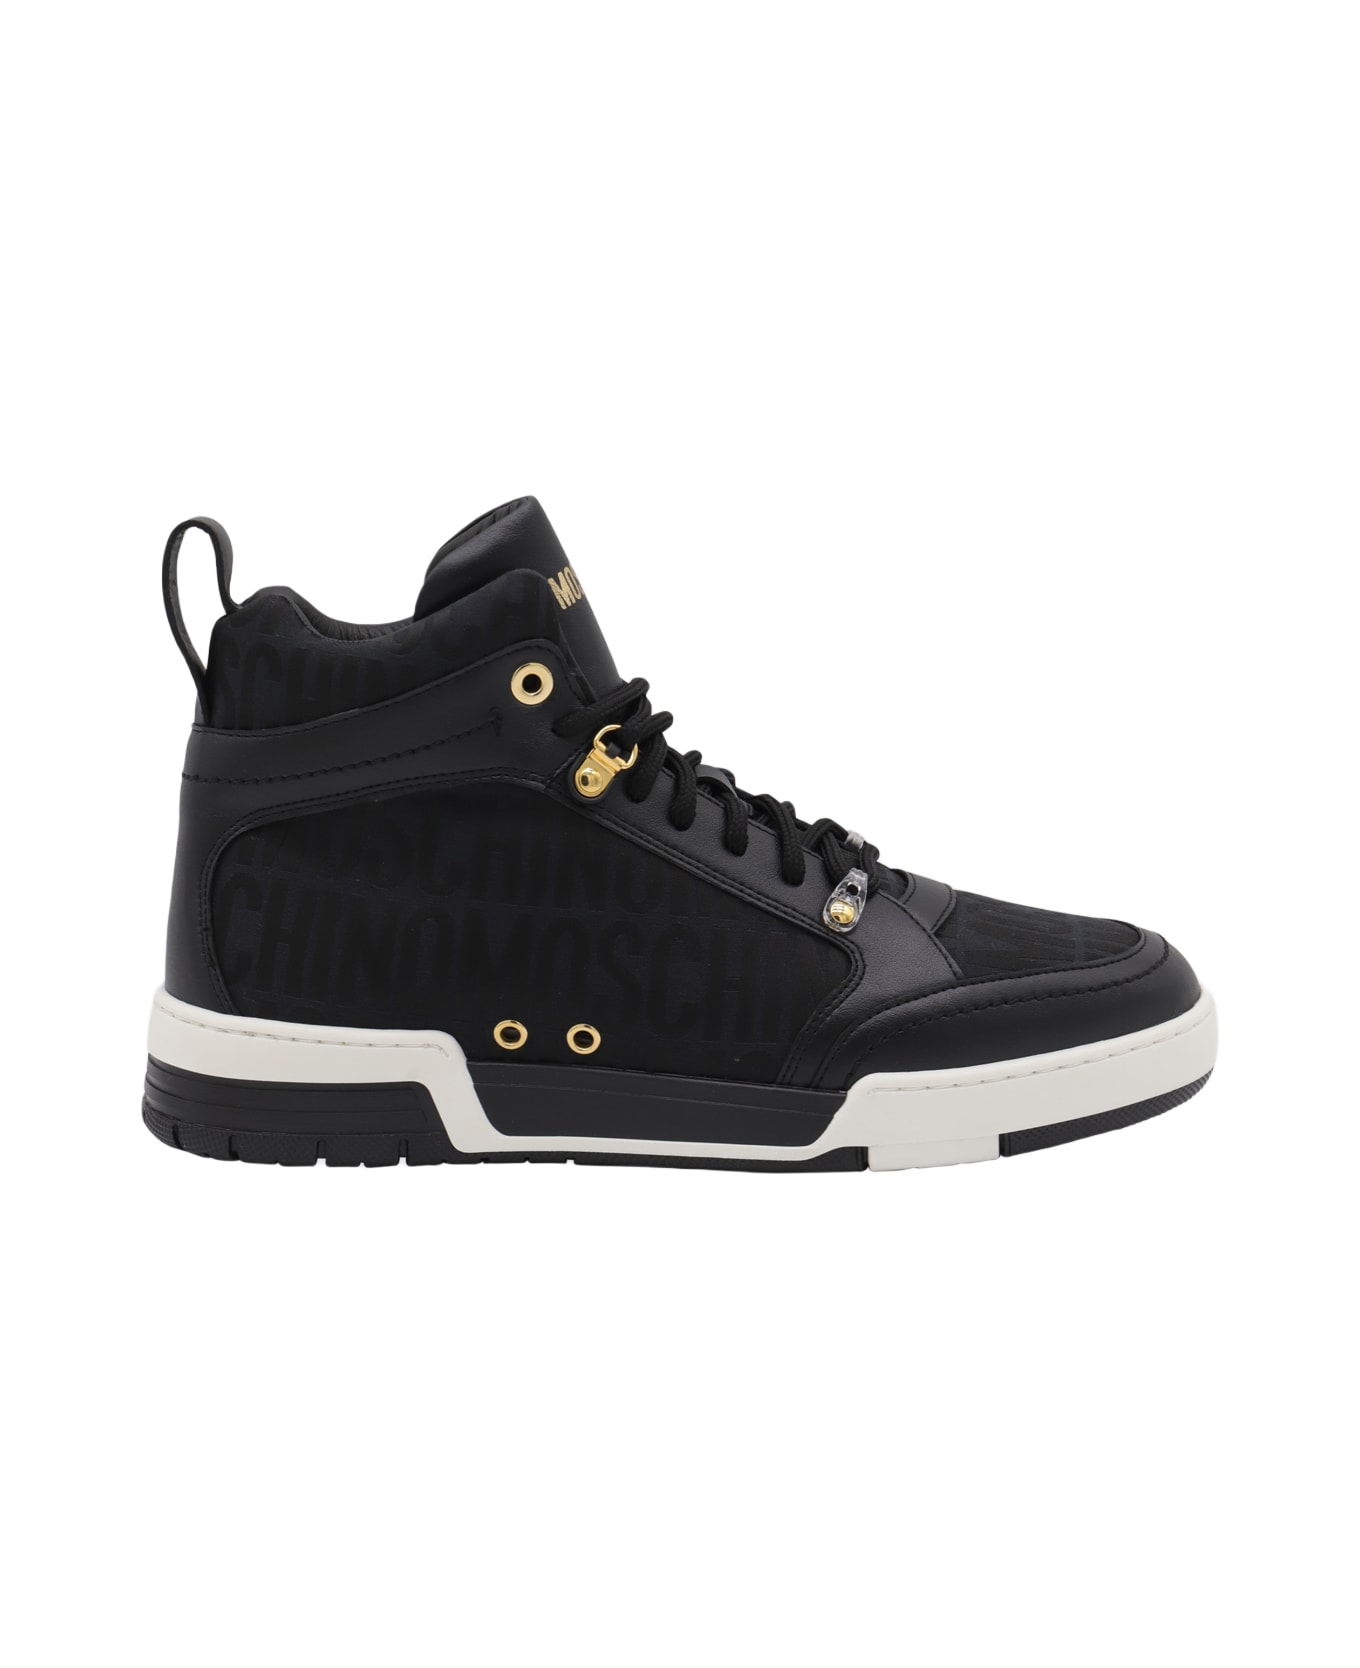 Moschino Black Leather And Canvas Monogram Jacquard High Top Sneakers - Black スニーカー